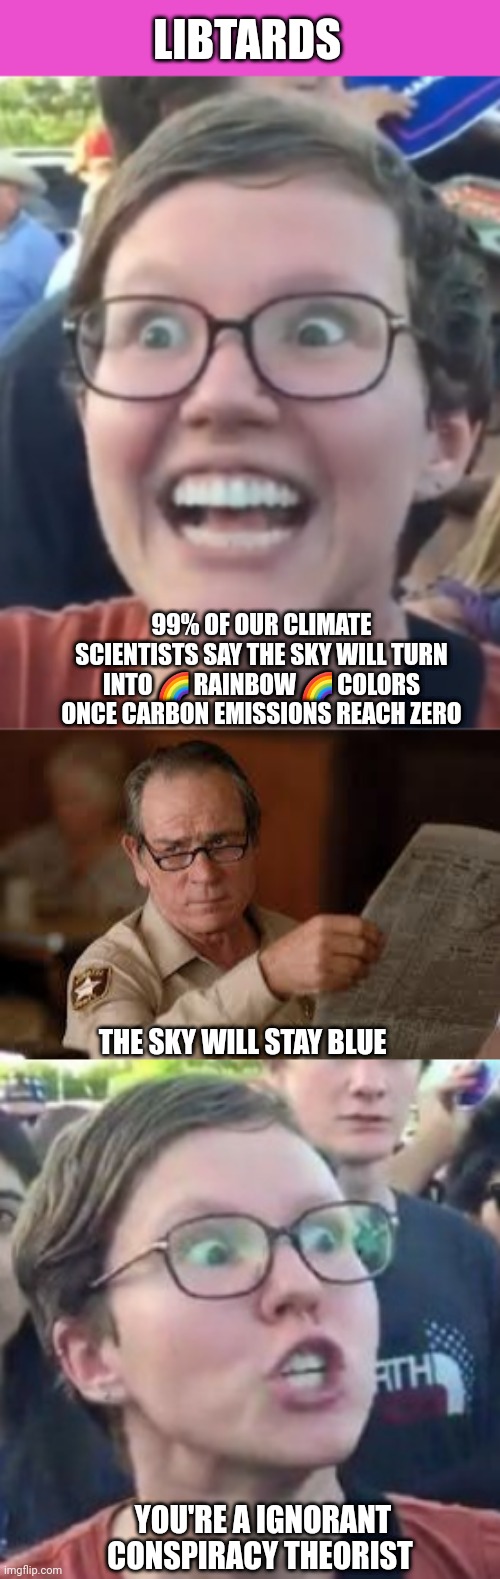 LIBTARDS; 99% OF OUR CLIMATE SCIENTISTS SAY THE SKY WILL TURN INTO 🌈 RAINBOW 🌈 COLORS ONCE CARBON EMISSIONS REACH ZERO; THE SKY WILL STAY BLUE; YOU'RE A IGNORANT CONSPIRACY THEORIST | image tagged in no country for old men tommy lee jones | made w/ Imgflip meme maker